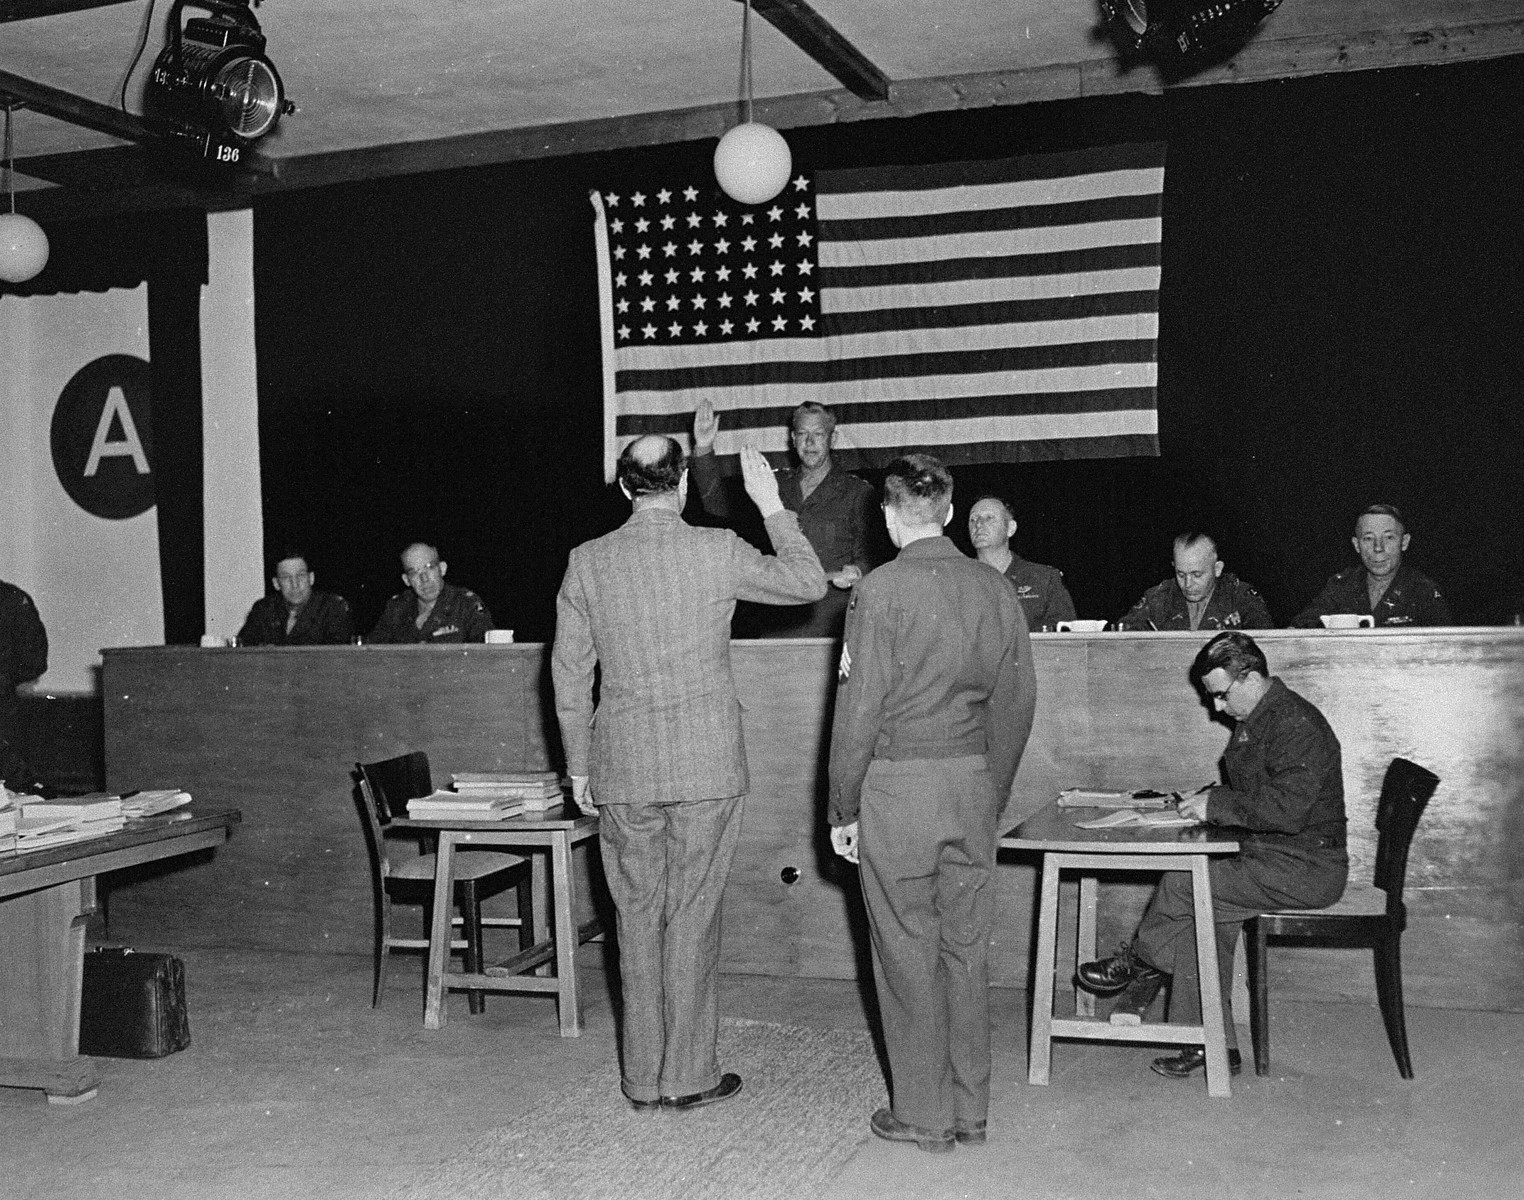 A witness is sworn in at the trial of 61 former camp personnel and prisoners from Mauthausen.  Swearing him in is Major General Fay Brink Prickett, the President of the Military Tribunal.